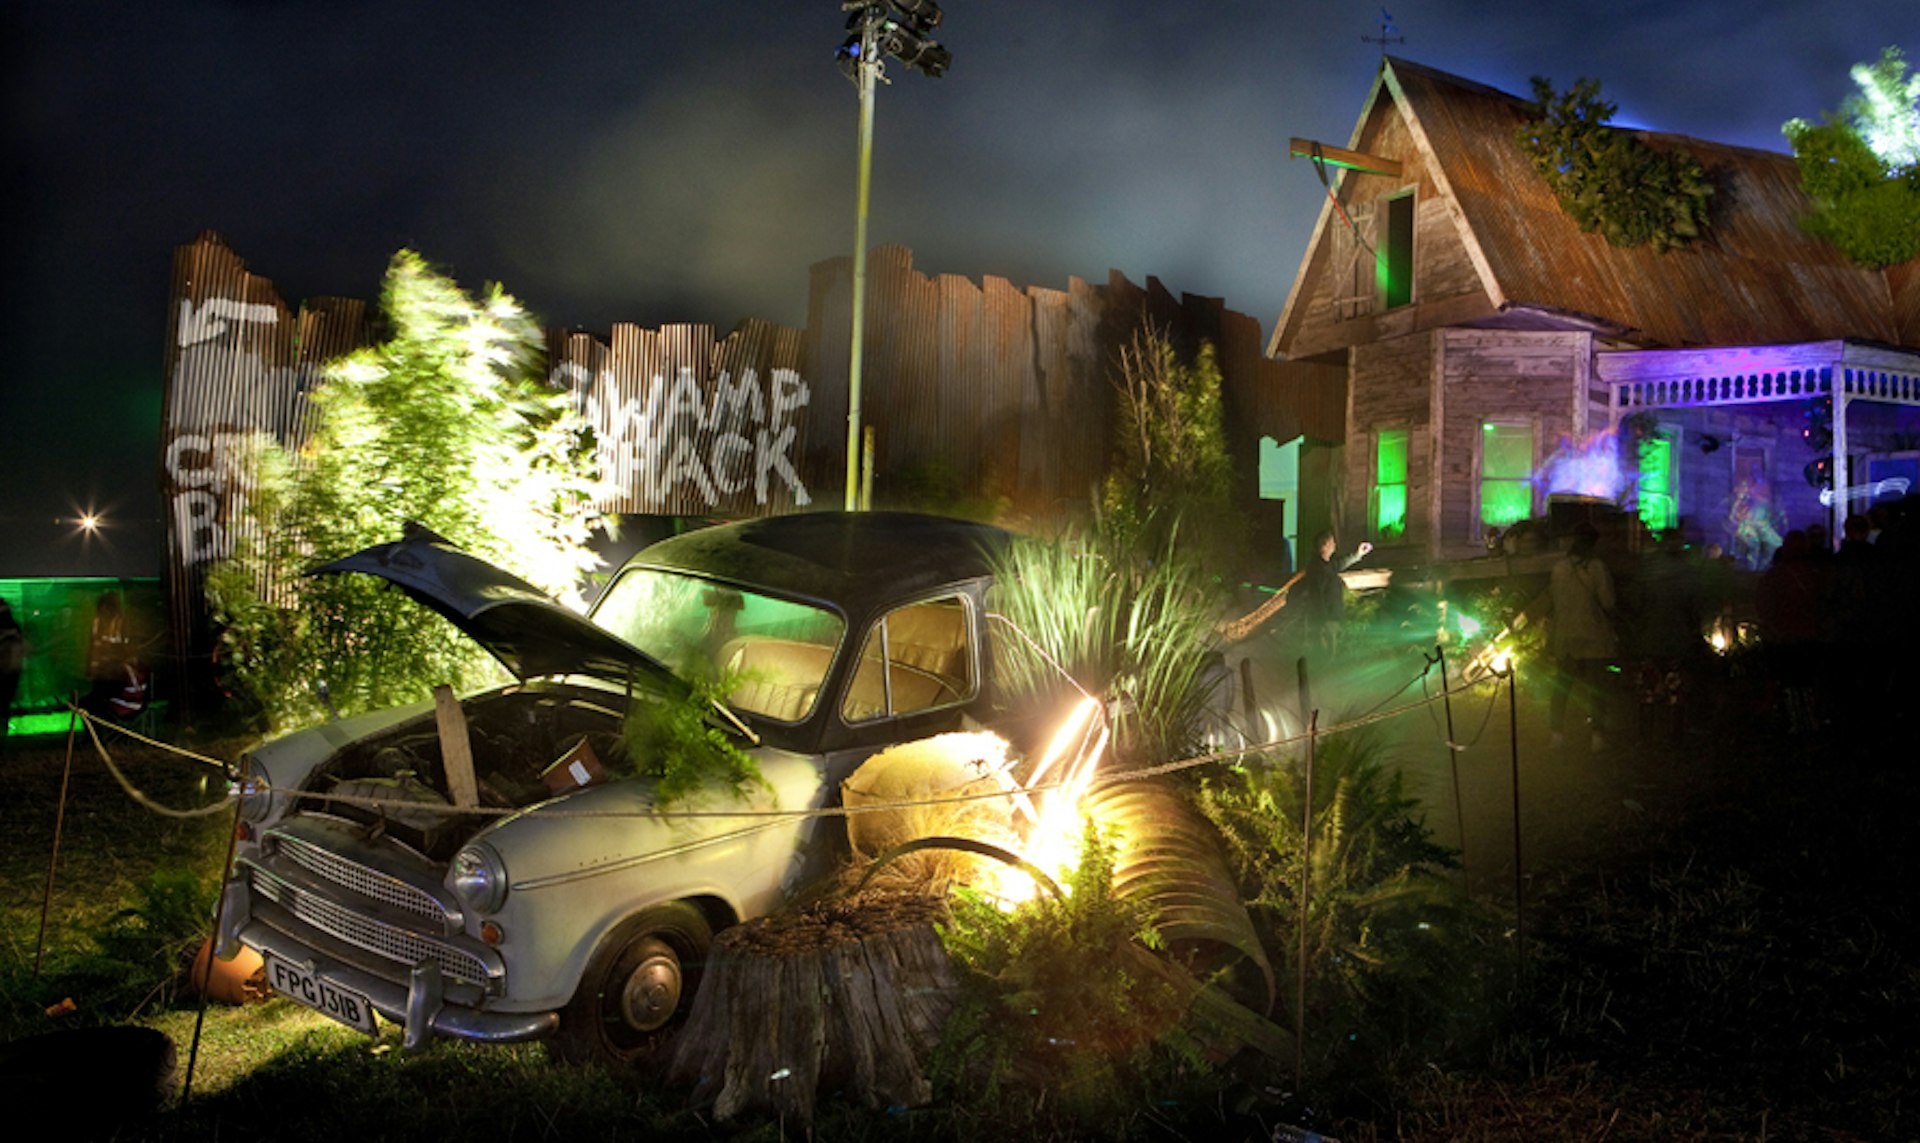 The Swamp Shack, Bestival. Photo by Nic Serpell-Rand.